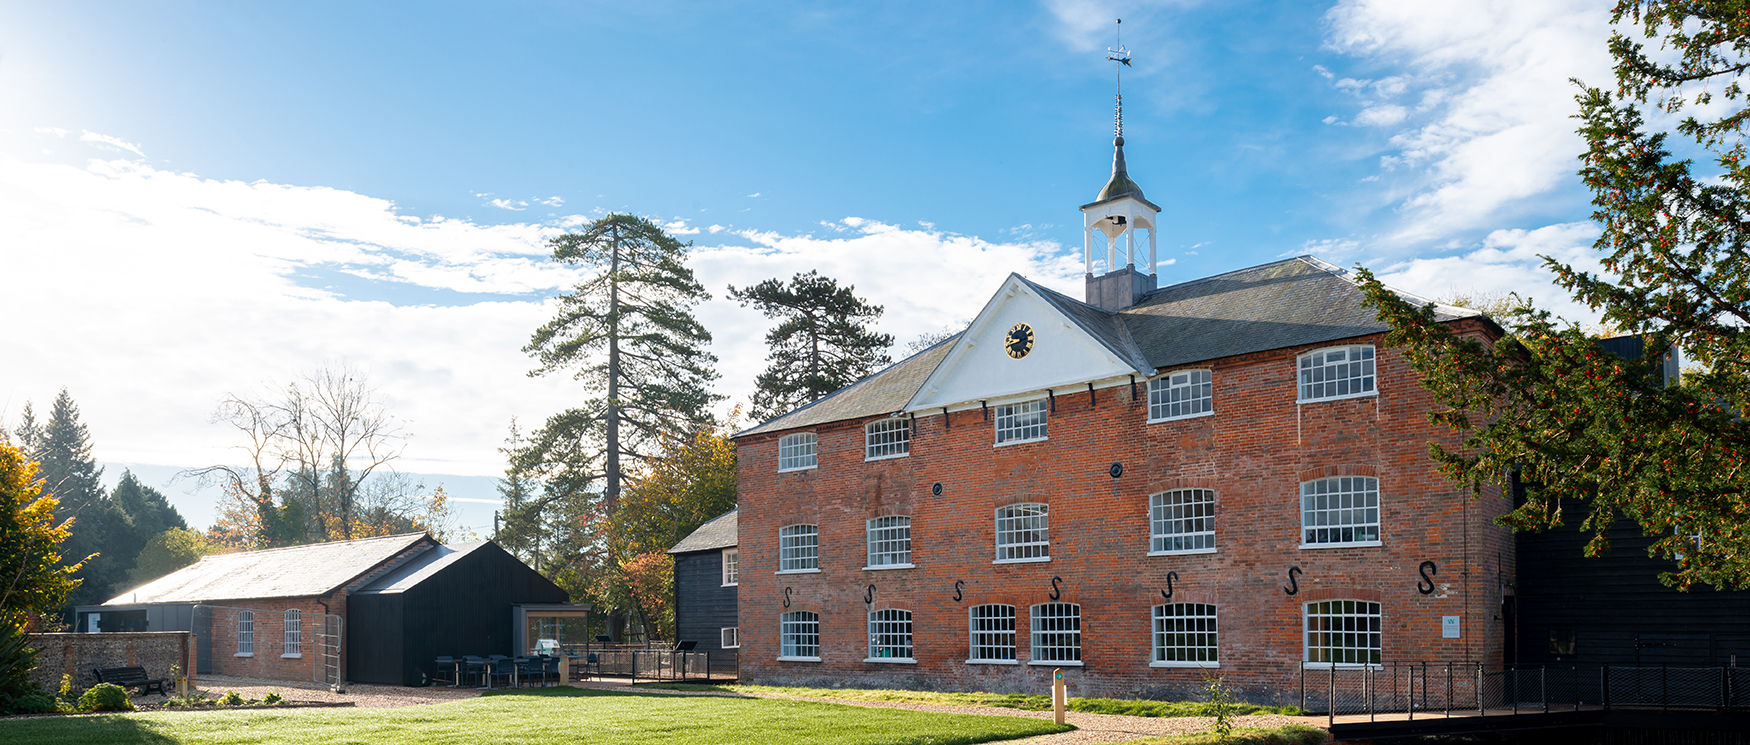 Whitchurch Silk Mill, Whitchurch, Hampshire